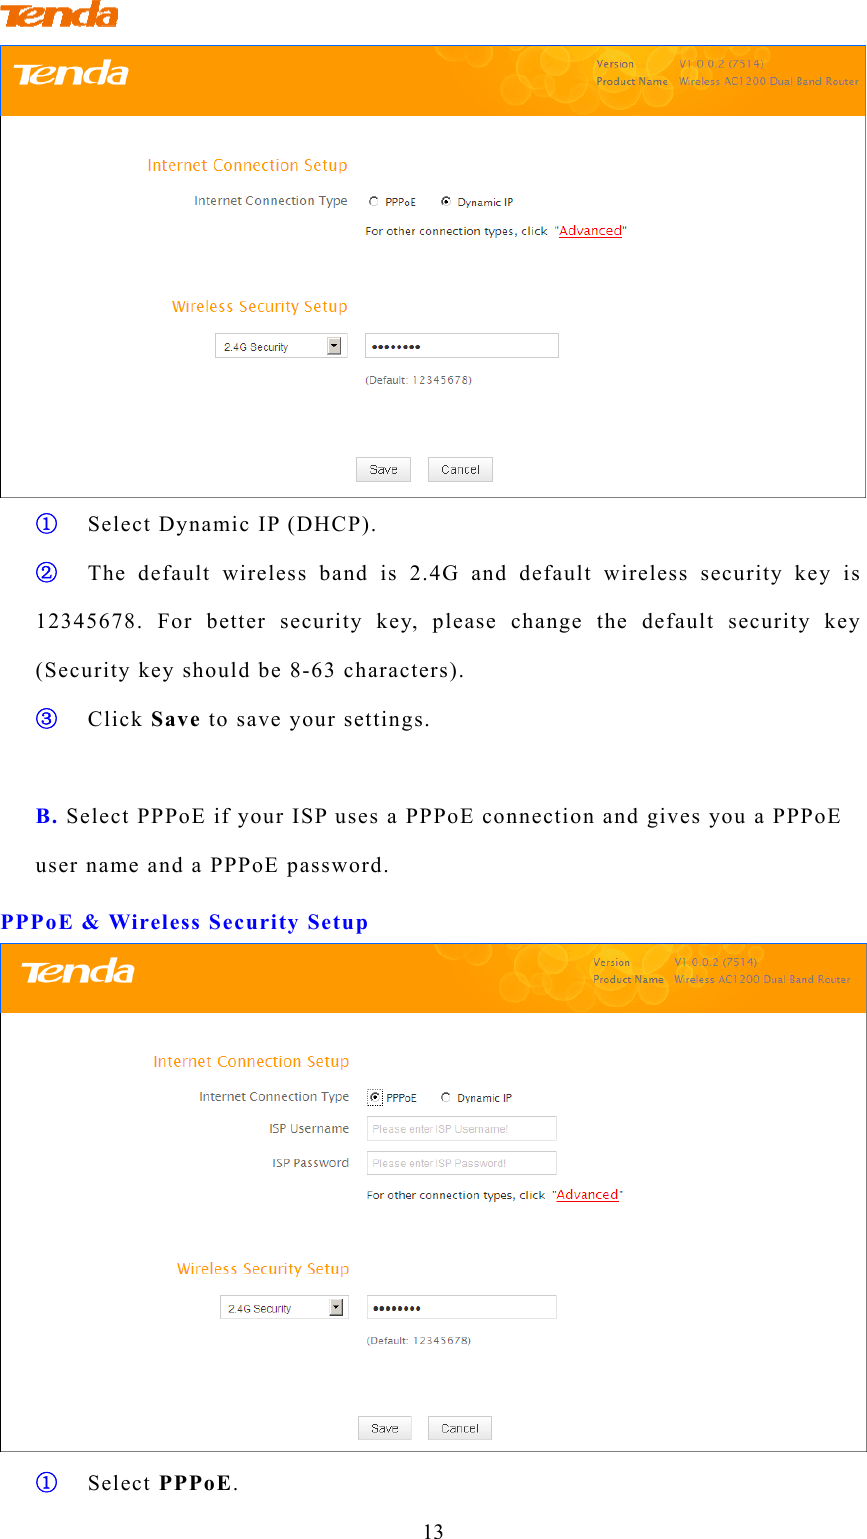  13  ① Select Dynamic IP (DHCP). ② The default wireless band is 2.4G and default wireless security key is 12345678. For better security key, please change the default security key (Security key should be 8-63 characters).   ③ Click Save to save your settings.  B. Select PPPoE if your ISP uses a PPPoE connection and gives you a PPPoE user name and a PPPoE password. PPPoE &amp; Wireless Security Setup  ① Select PPPoE. 